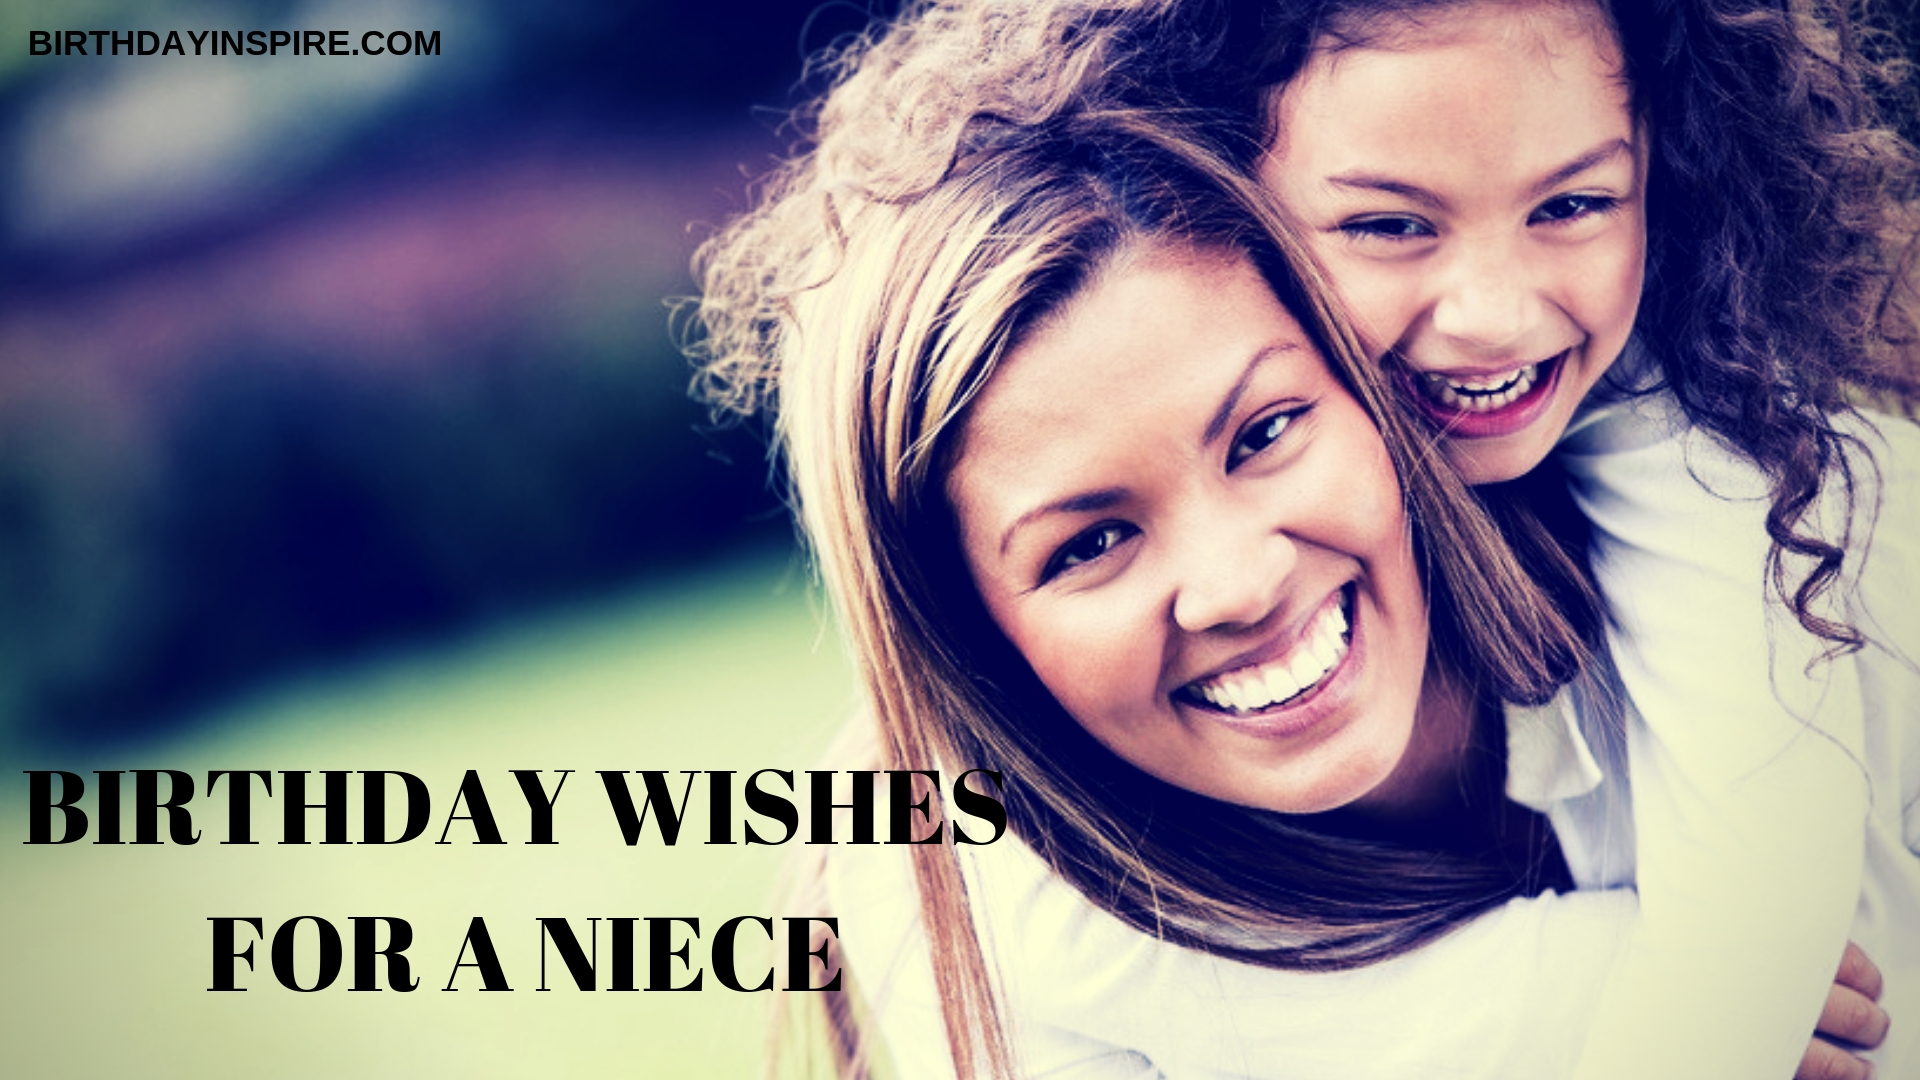 60 Inspirational Birthday Wishes For A Niece - Birthday Inspire